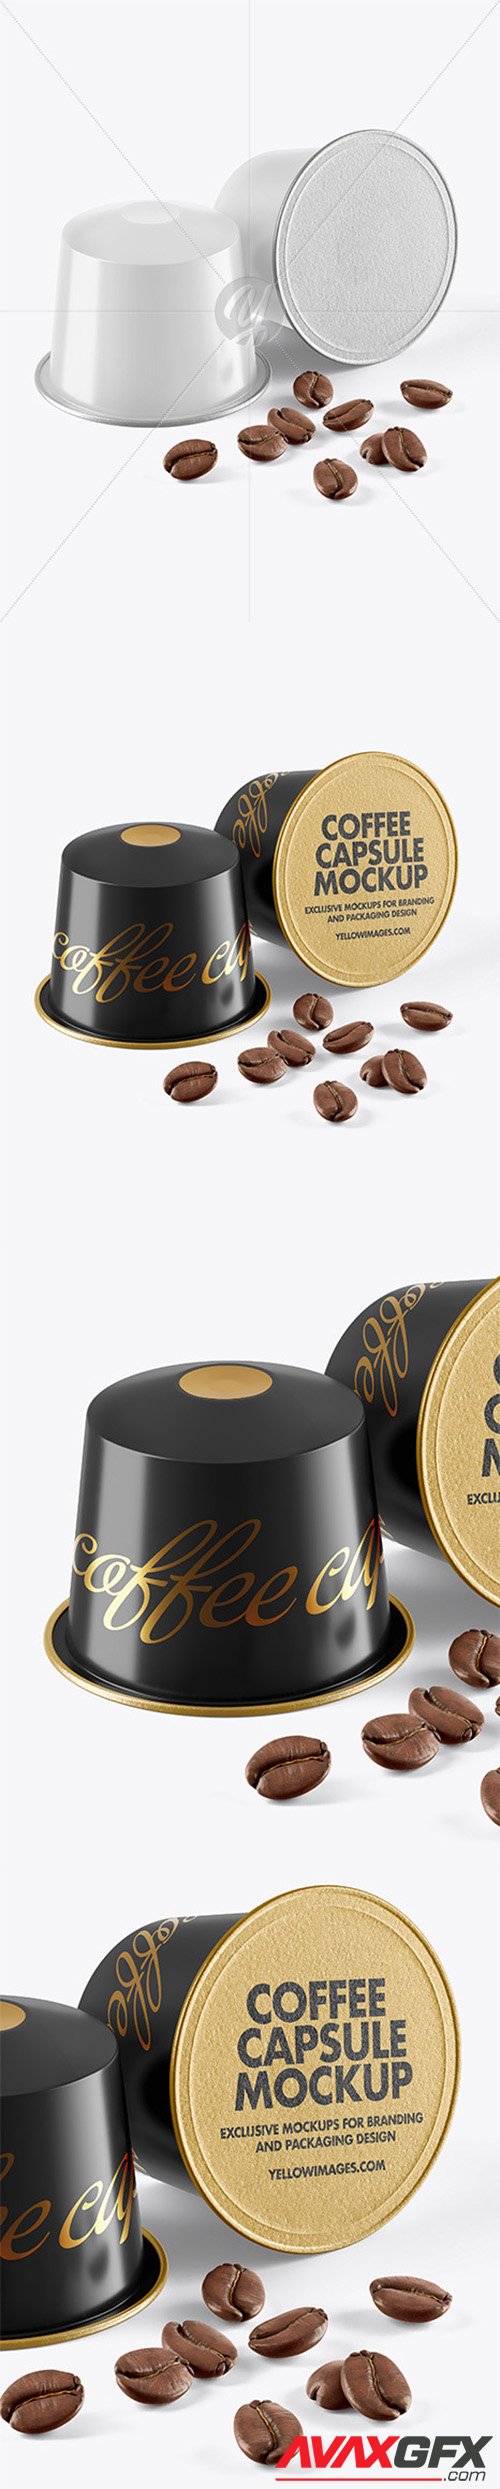 Download Coffee Capsules Paper Box Mockup 60796 Avaxgfx All Downloads That You Need In One Place Graphic From Nitroflare Rapidgator PSD Mockup Templates